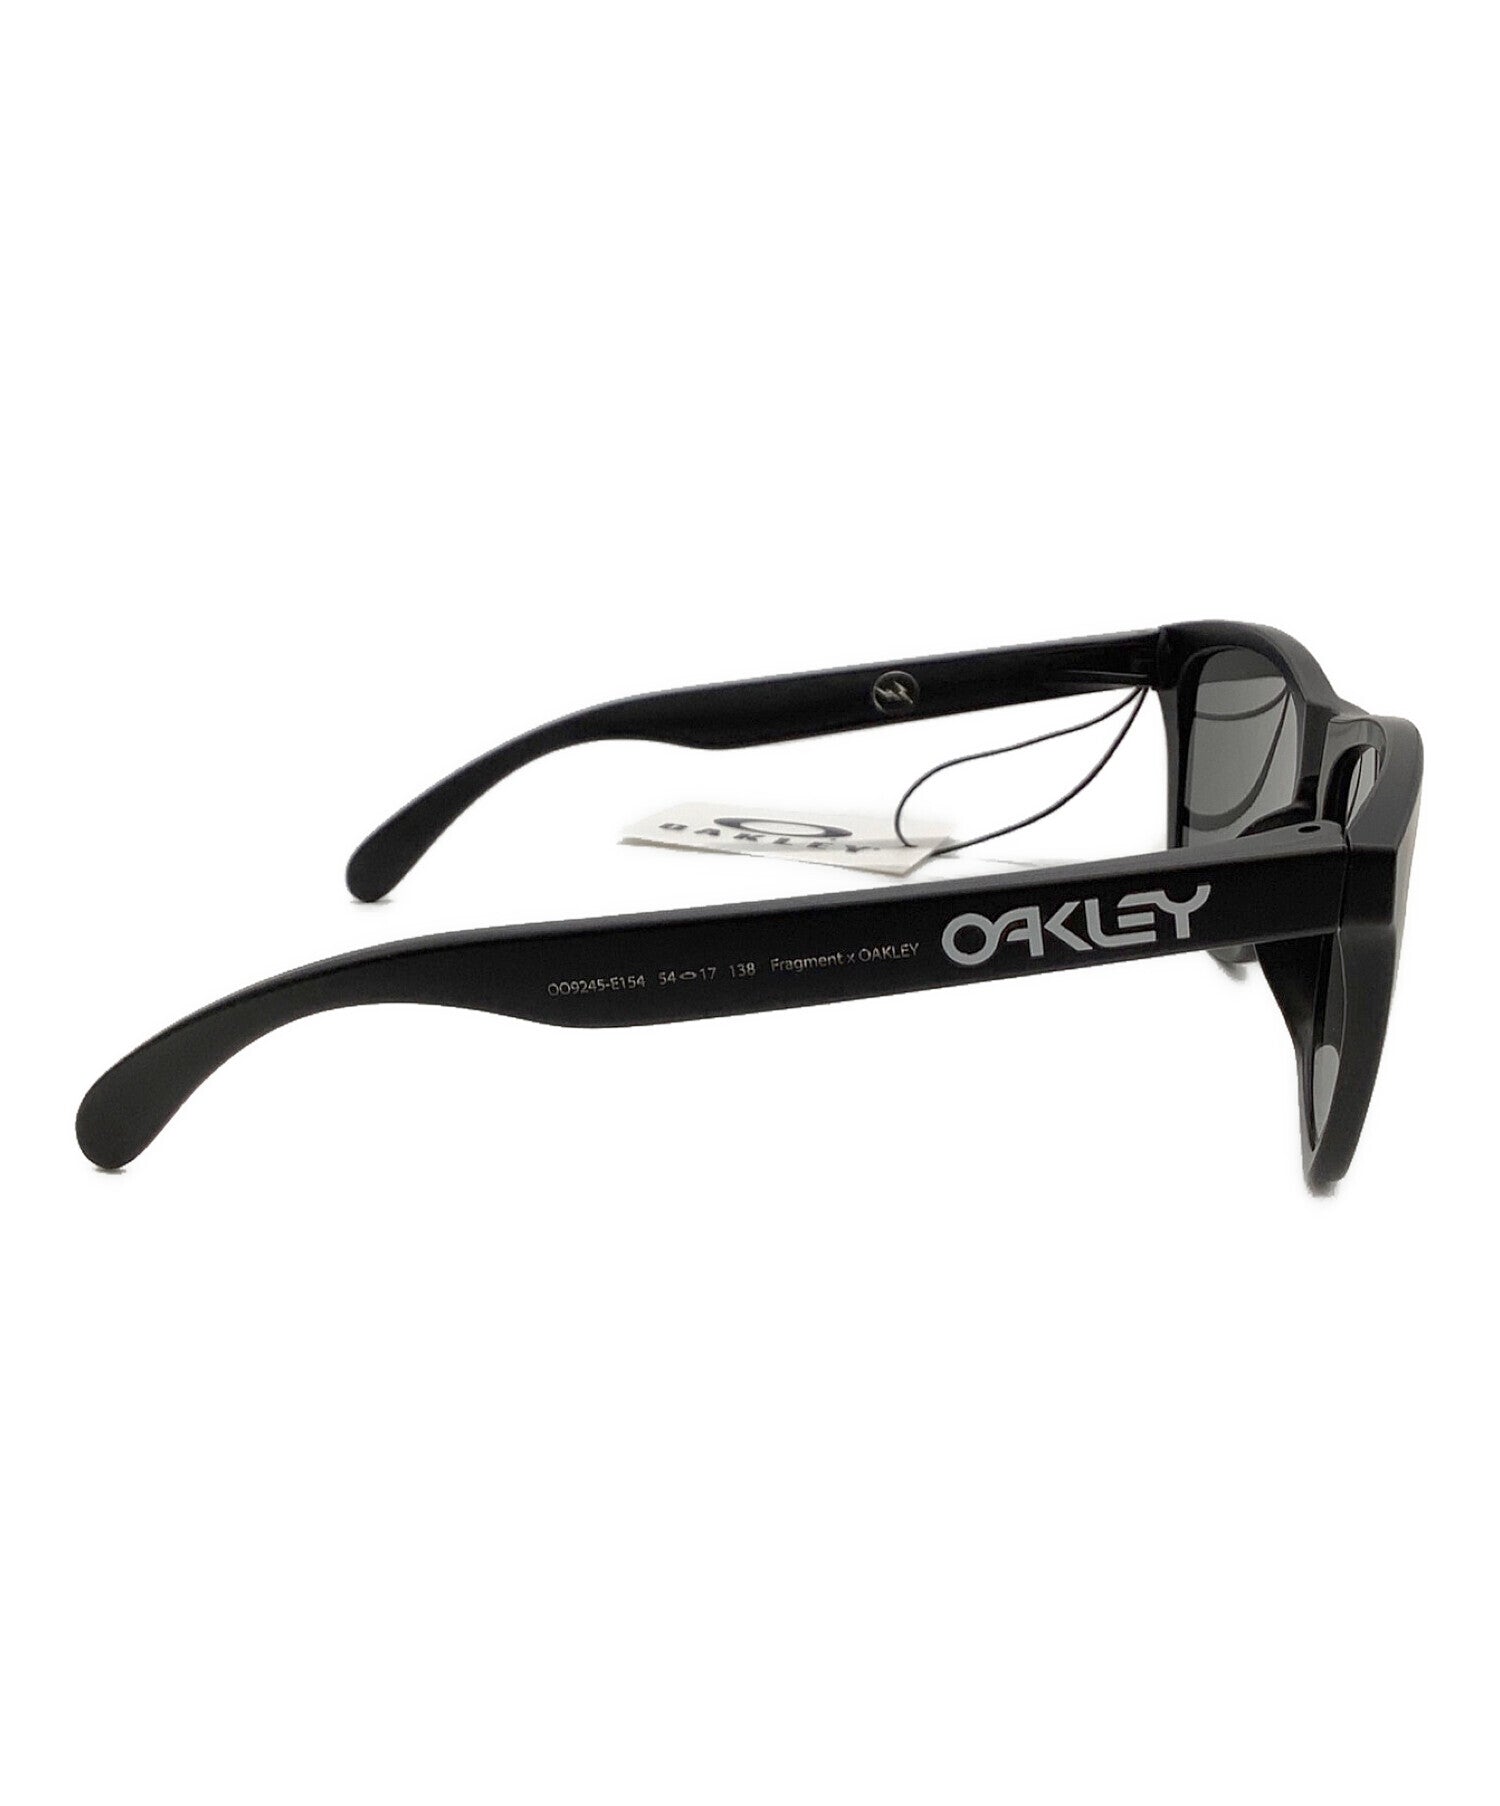 OAKLEY x fragment design sunglasses 0OO6044 | Archive Factory